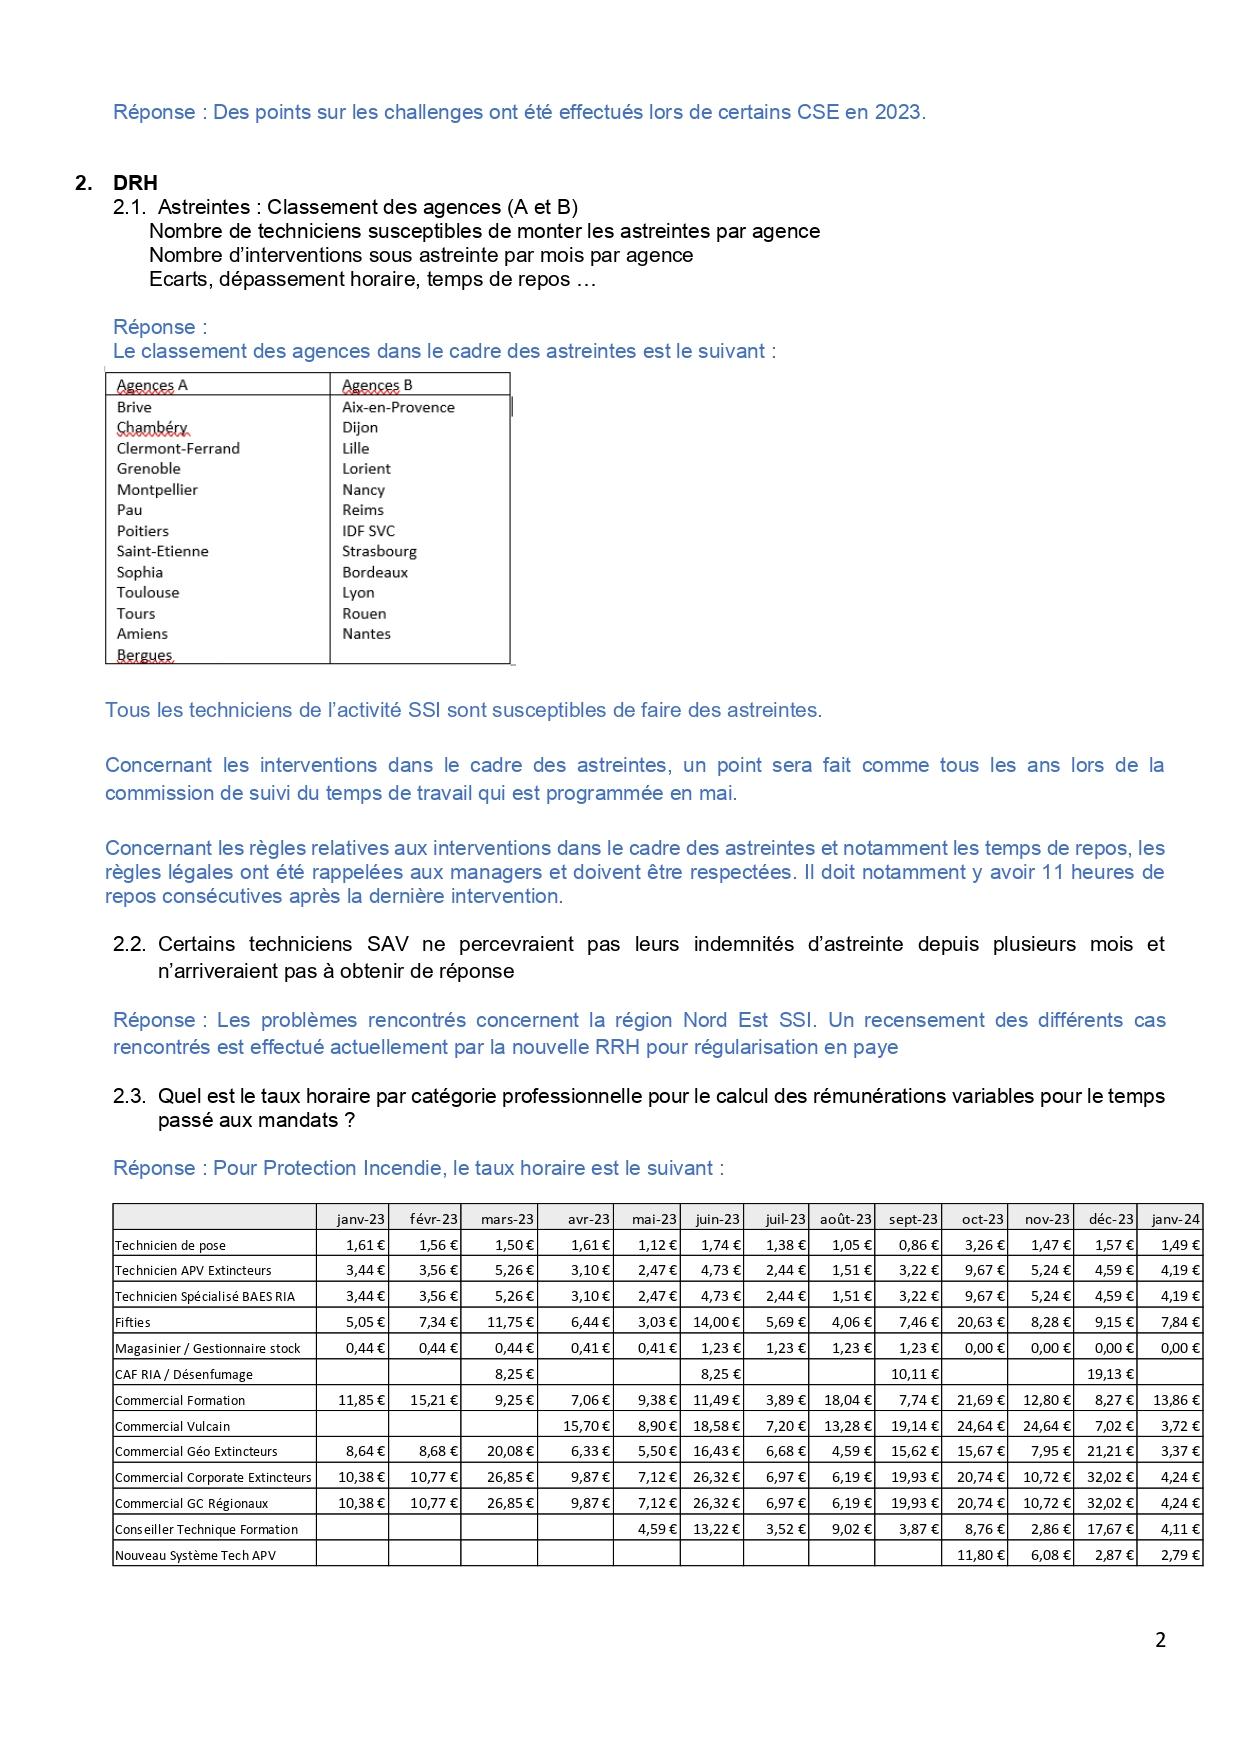 Reponses aux questions du cse 21 03 24 vdef pages to jpg 0002